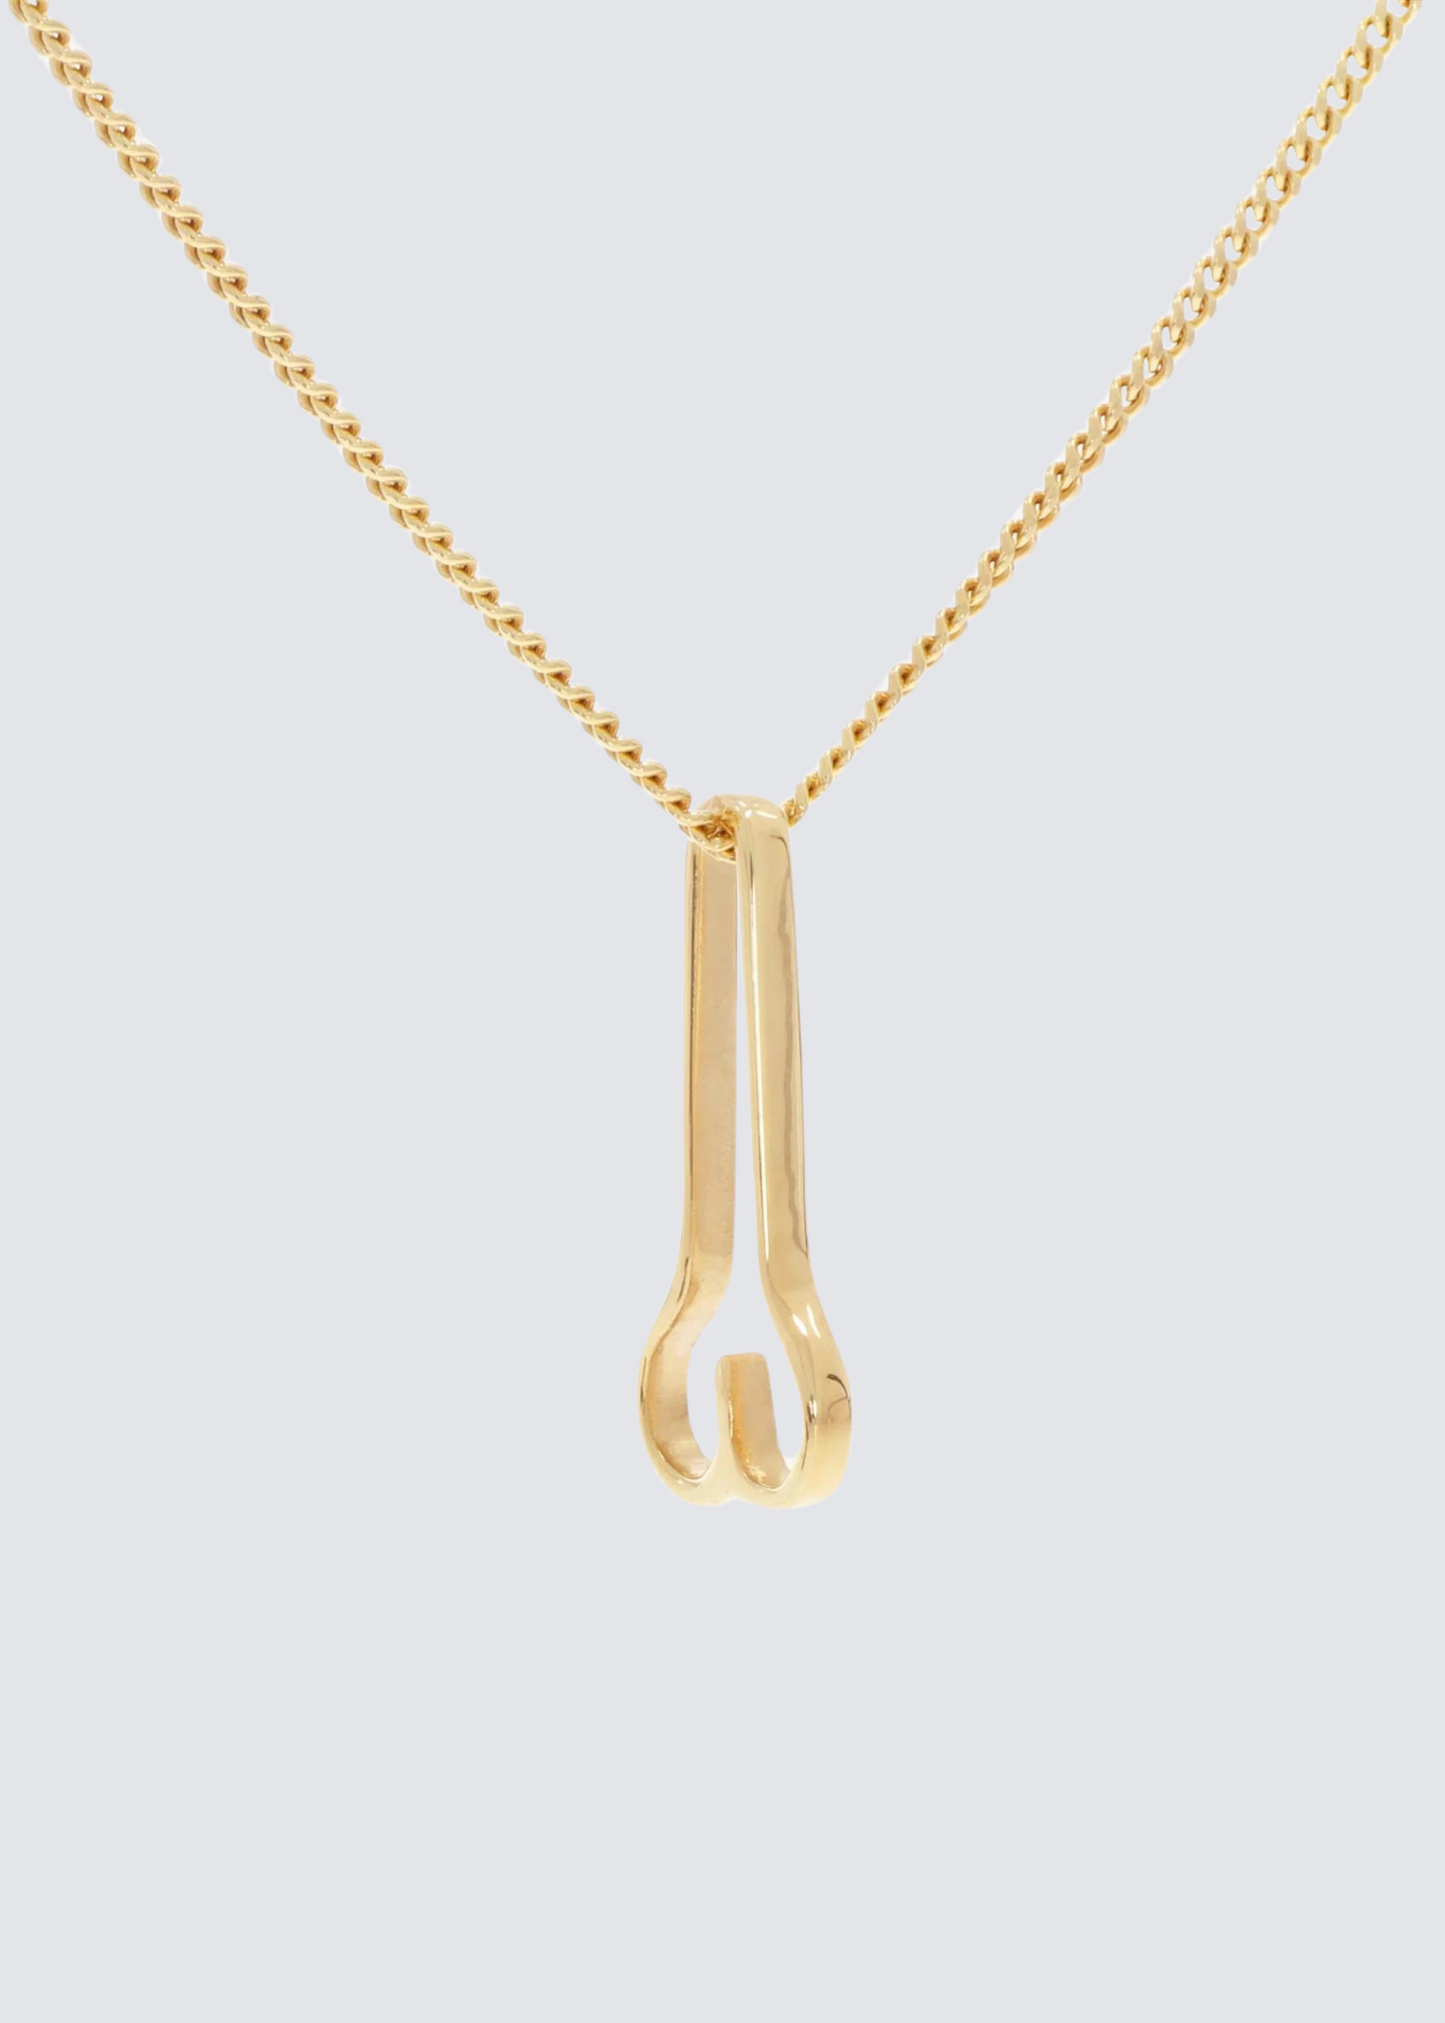 Willy Chain, Gold, Kette